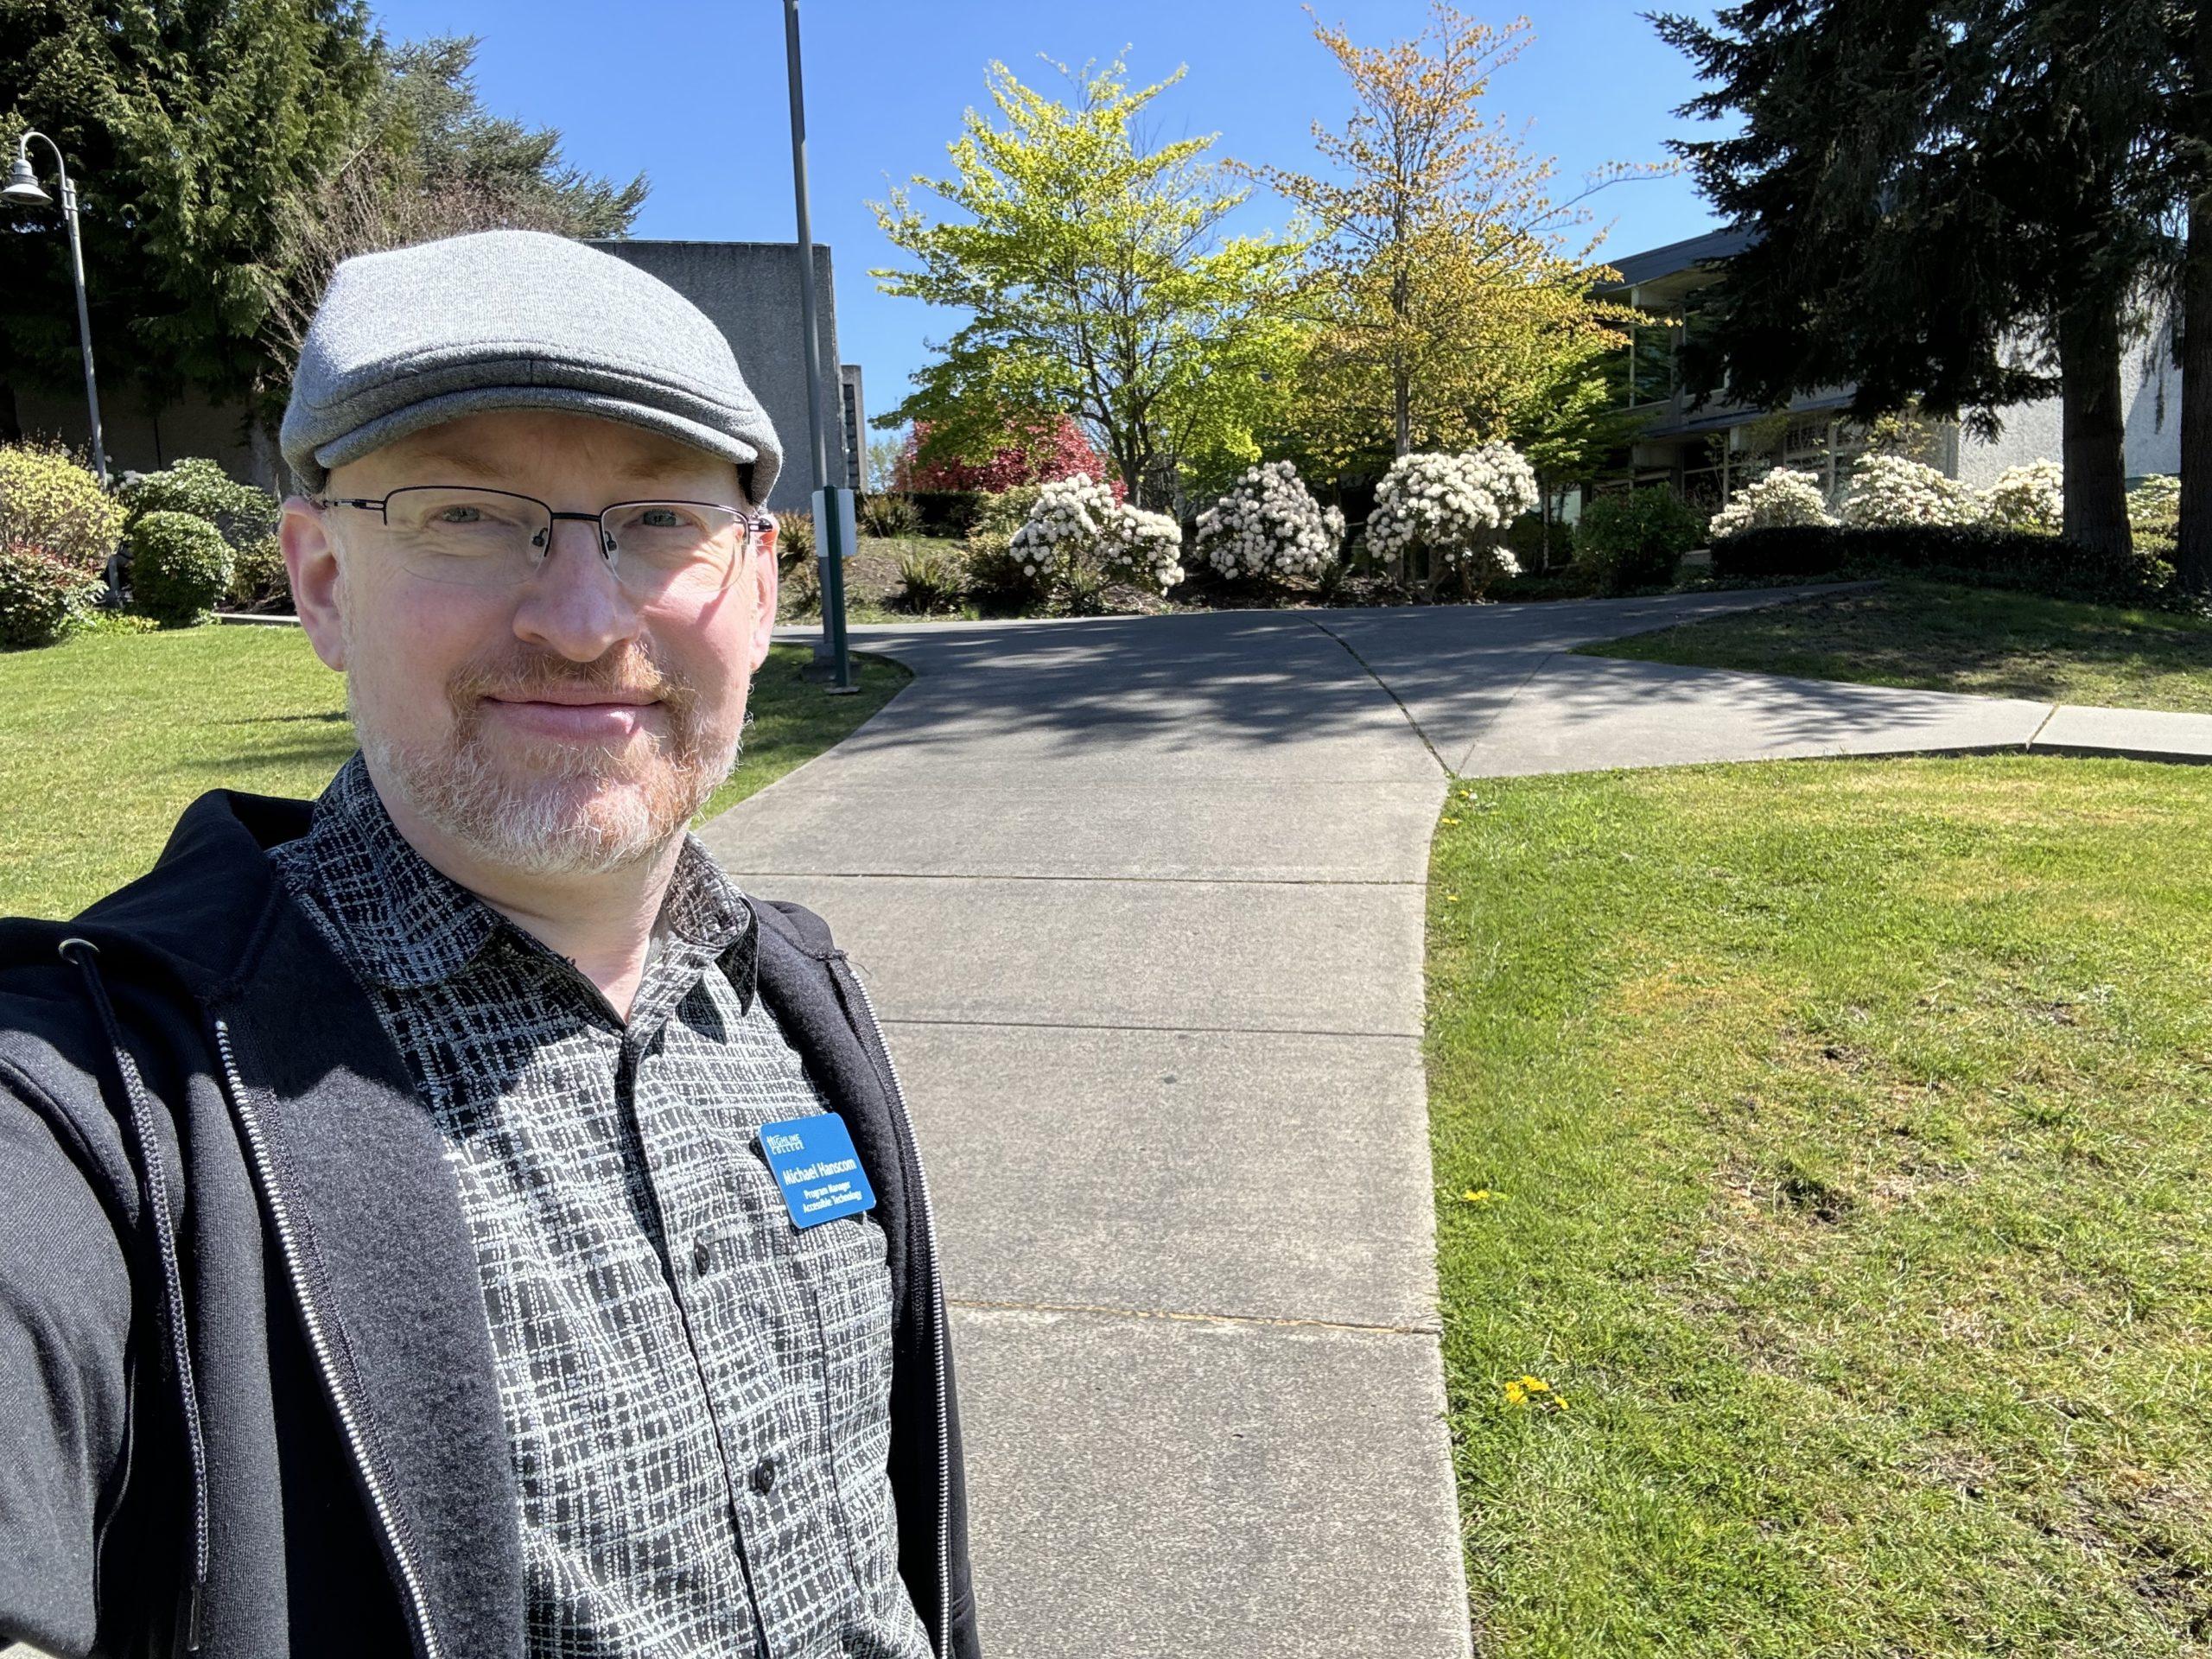 Me outside in the sun on a concrete path between two grassy areas, with bright green trees and flowering bushes in the background.